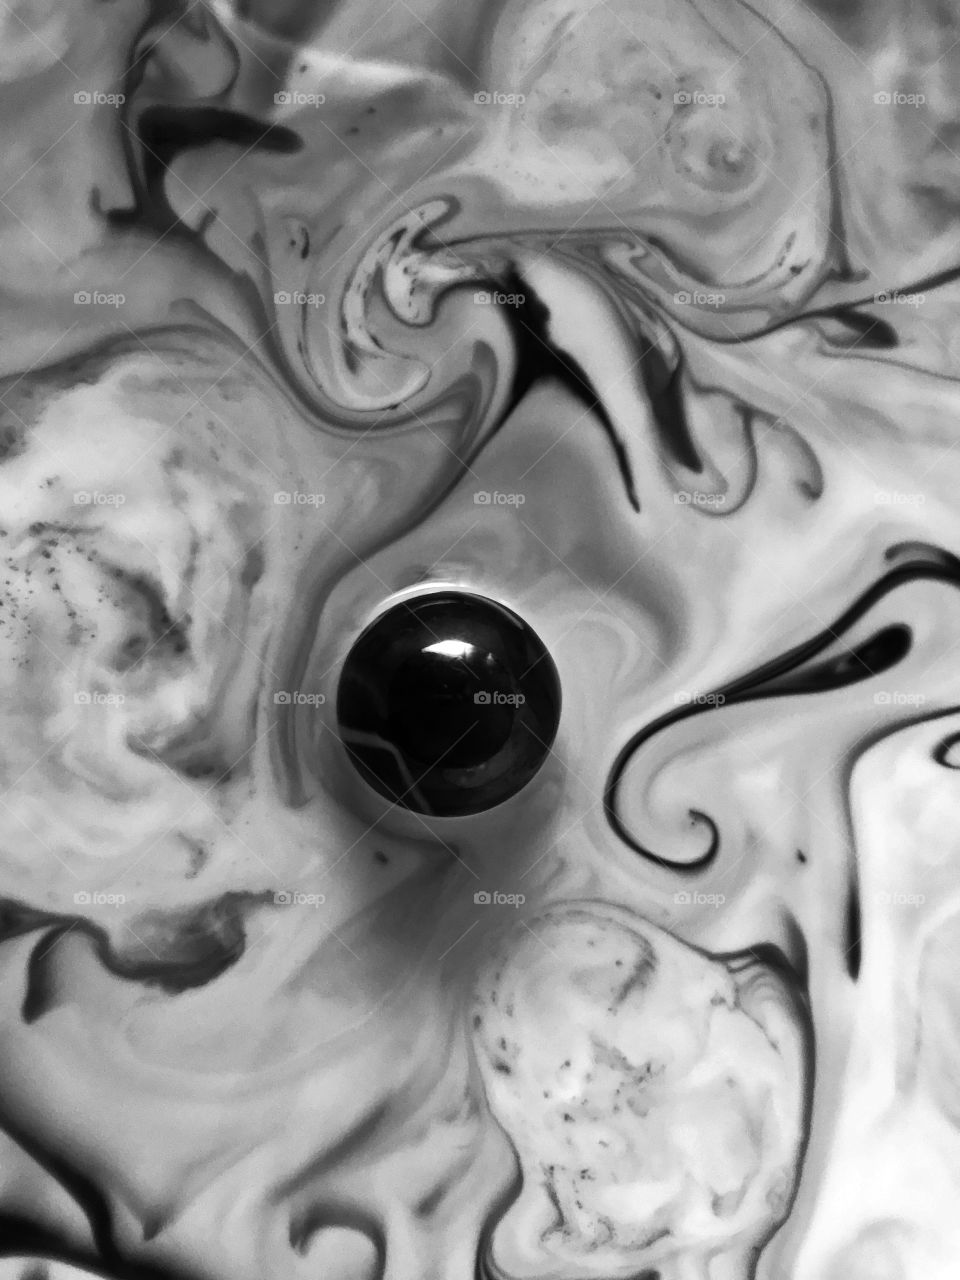 Creating soft, flowing, dynamic, three dimensional abstracts today. This black and white was made with glue and dish soap with food dye painted in small swirling lines into the mixture. All centered by one shiny dark marble. 